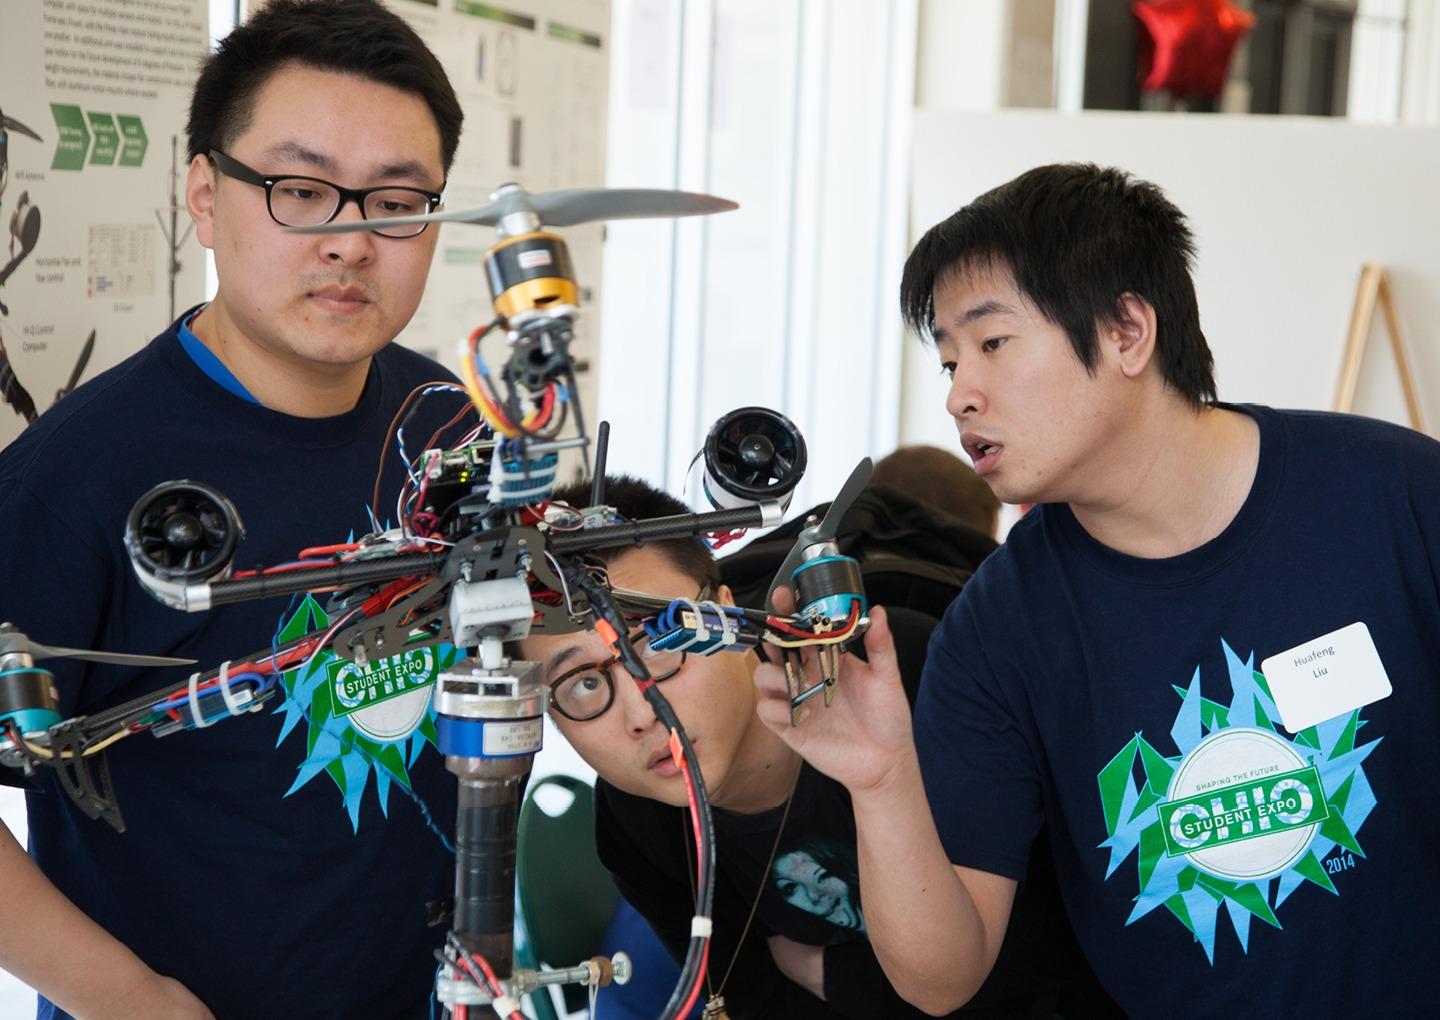 Huafeng Liu, BSEE’15, [RIGHT] explains the tricopter design his team built to classmates at the 2014 Student Research and Creative Activity Expo. Photo by Jonathan Adams